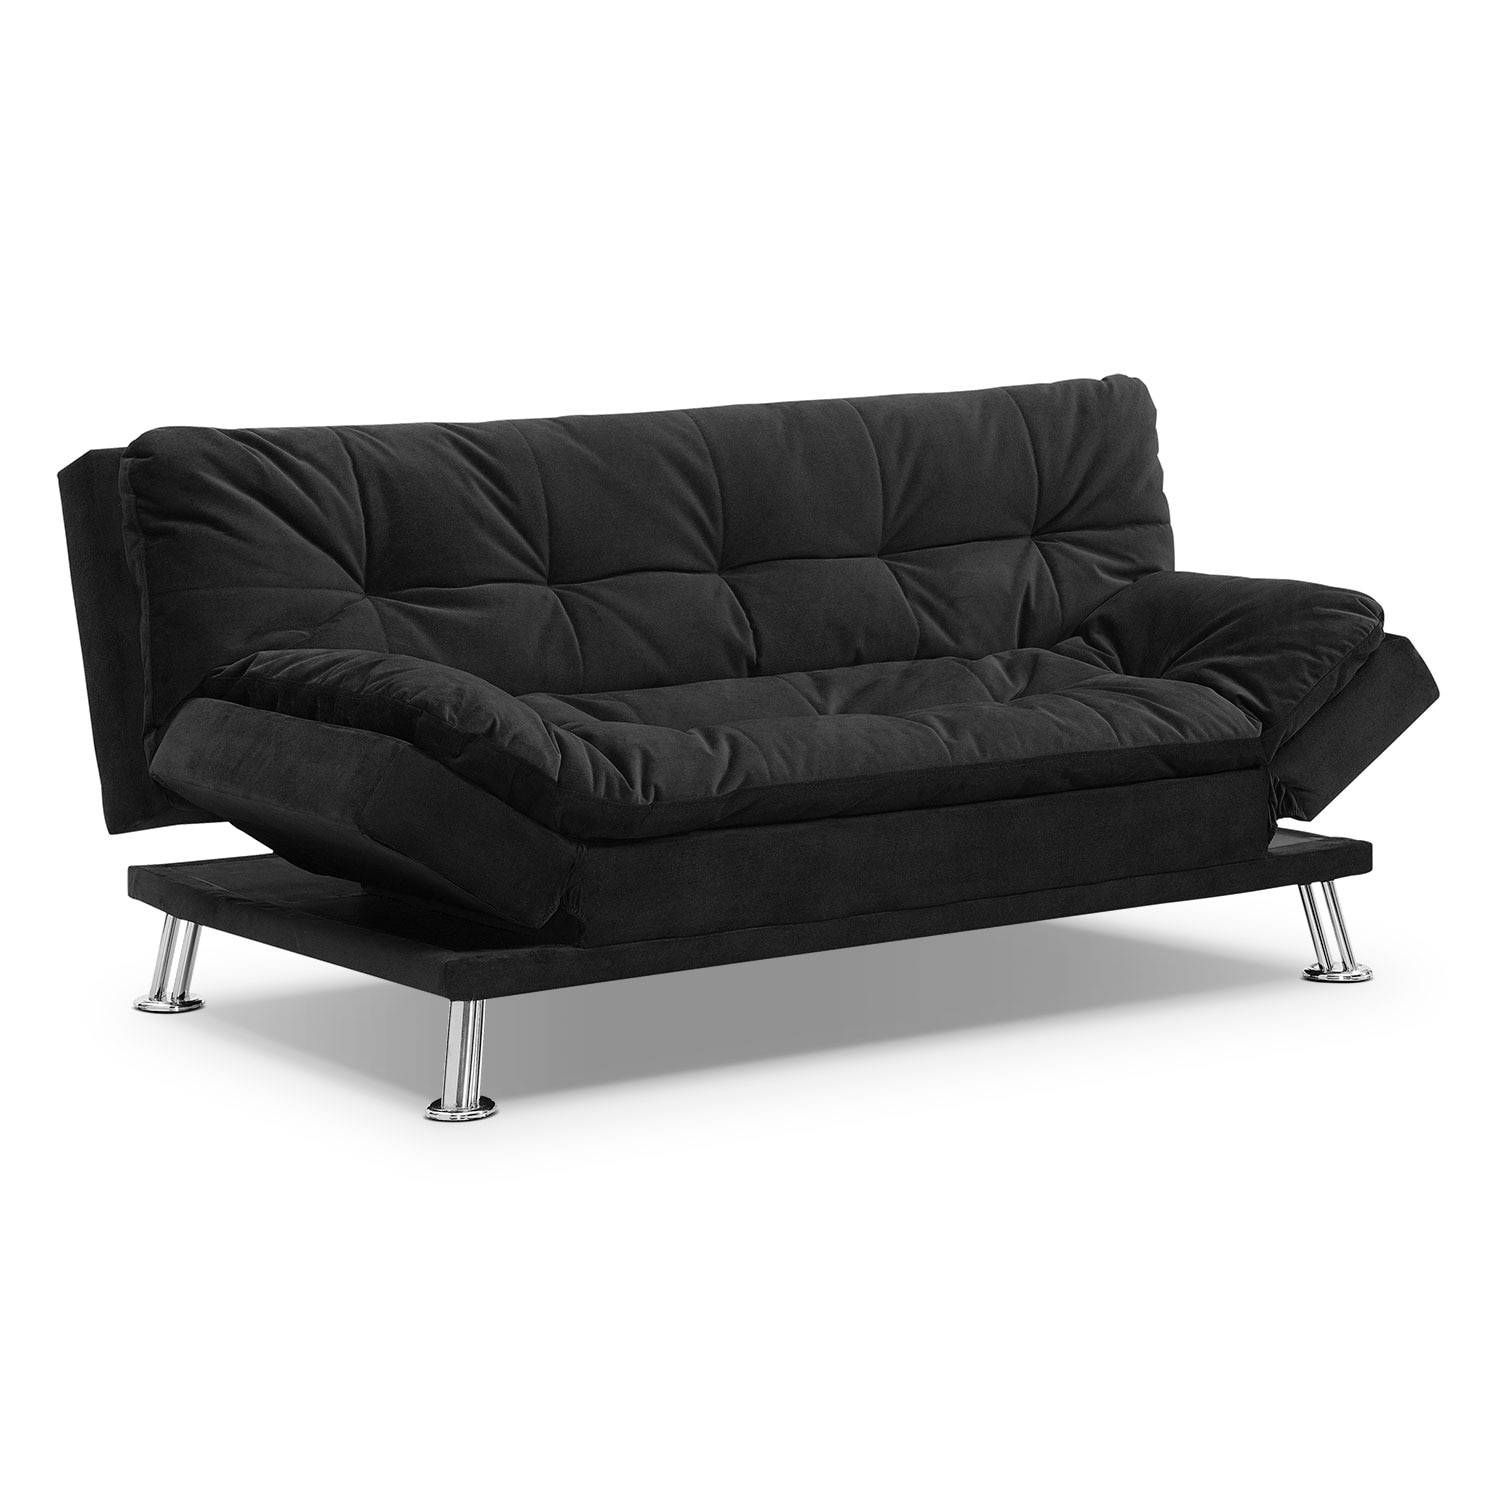 Waltz Futon Sofa Bed – Black | Value City Furniture Intended For Small Black Futon Sofa Beds (Photo 2 of 15)